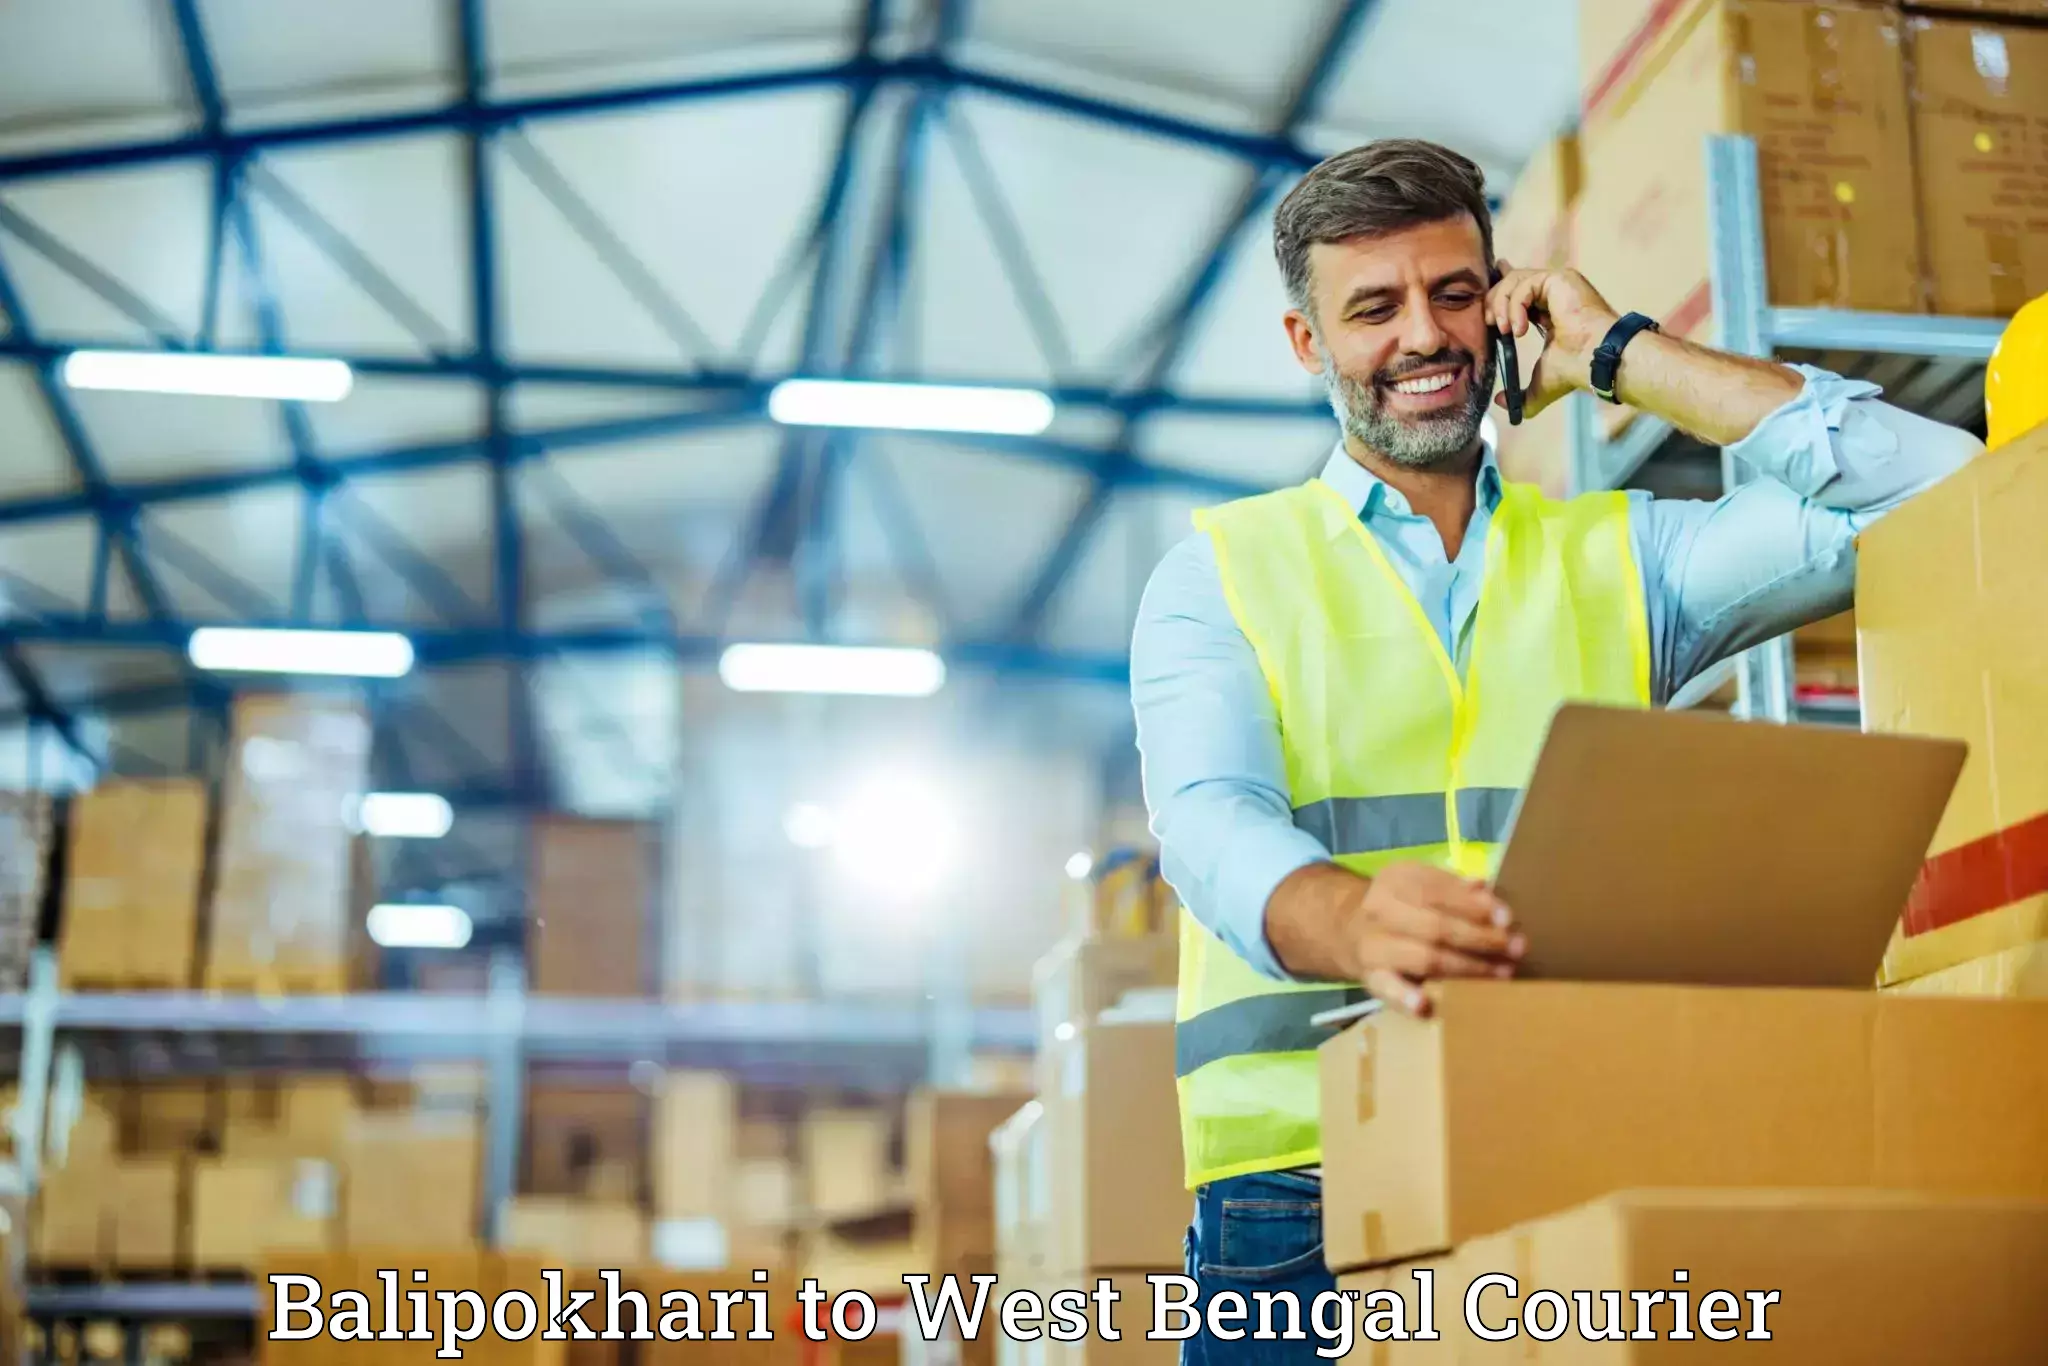 Furniture delivery service in Balipokhari to West Bengal